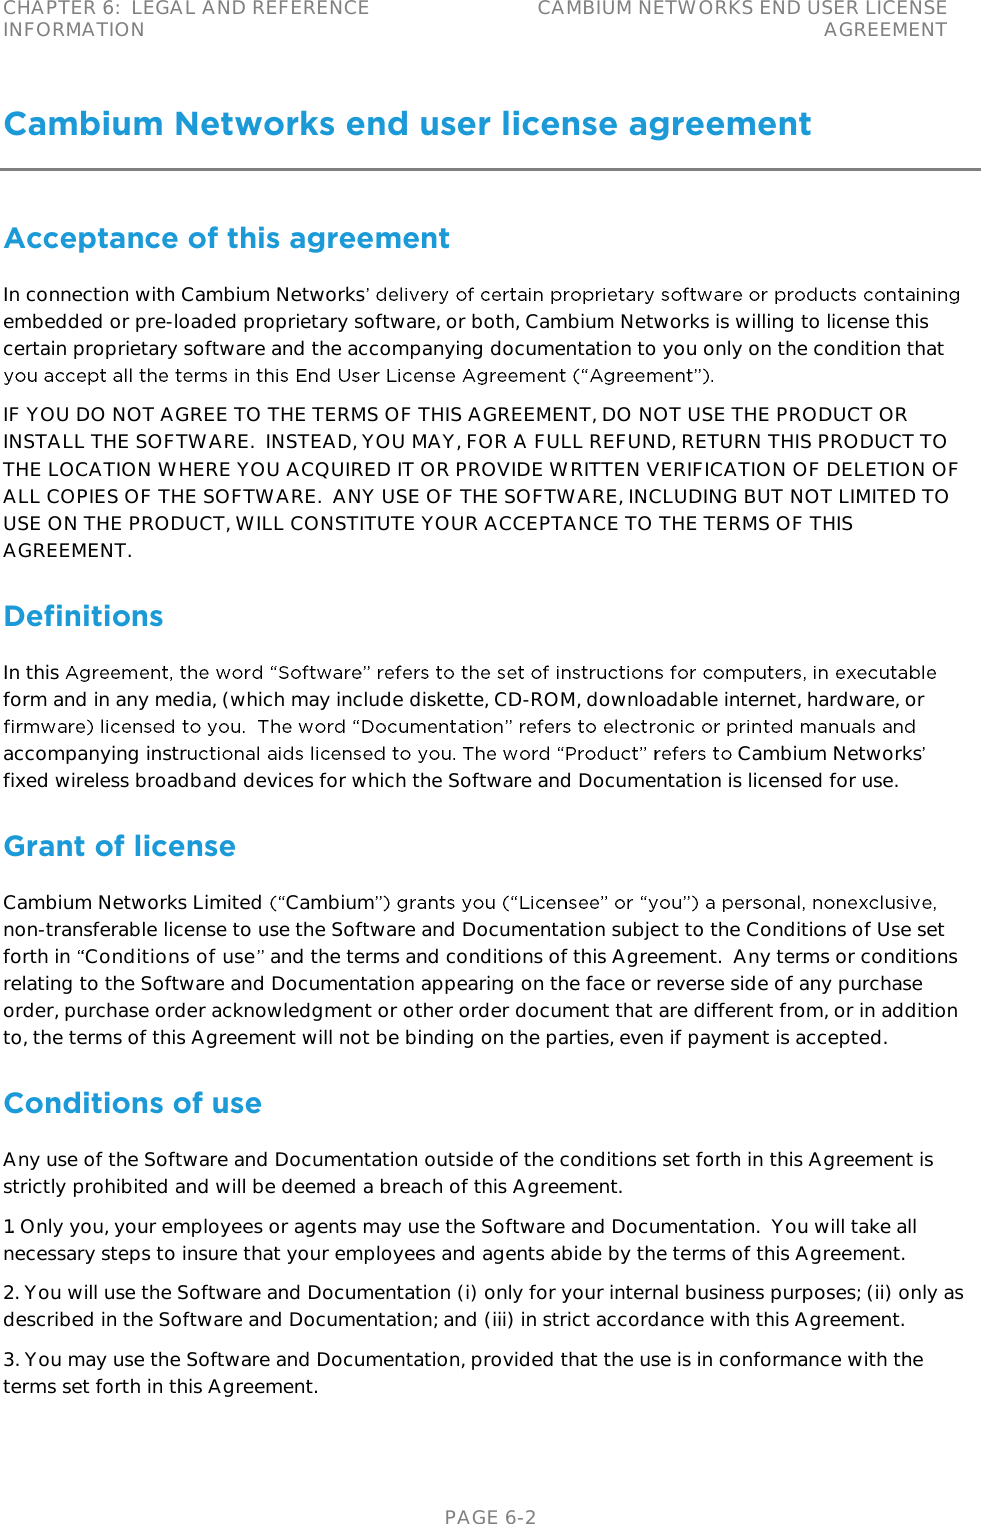 CHAPTER 6:  LEGAL AND REFERENCE INFORMATION CAMBIUM NETWORKS END USER LICENSE AGREEMENT   PAGE 6-2 Cambium Networks end user license agreement Acceptance of this agreement In connection with Cambium Networksembedded or pre-loaded proprietary software, or both, Cambium Networks is willing to license this certain proprietary software and the accompanying documentation to you only on the condition that  IF YOU DO NOT AGREE TO THE TERMS OF THIS AGREEMENT, DO NOT USE THE PRODUCT OR INSTALL THE SOFTWARE.  INSTEAD, YOU MAY, FOR A FULL REFUND, RETURN THIS PRODUCT TO THE LOCATION WHERE YOU ACQUIRED IT OR PROVIDE WRITTEN VERIFICATION OF DELETION OF ALL COPIES OF THE SOFTWARE.  ANY USE OF THE SOFTWARE, INCLUDING BUT NOT LIMITED TO USE ON THE PRODUCT, WILL CONSTITUTE YOUR ACCEPTANCE TO THE TERMS OF THIS AGREEMENT.  Definitions In this form and in any media, (which may include diskette, CD-ROM, downloadable internet, hardware, or accompanying instr Cambium Networksfixed wireless broadband devices for which the Software and Documentation is licensed for use. Grant of license Cambium Networks Limited  Cambiumnon-transferable license to use the Software and Documentation subject to the Conditions of Use set forth in  Conditions of use  and the terms and conditions of this Agreement.  Any terms or conditions relating to the Software and Documentation appearing on the face or reverse side of any purchase order, purchase order acknowledgment or other order document that are different from, or in addition to, the terms of this Agreement will not be binding on the parties, even if payment is accepted. Conditions of use Any use of the Software and Documentation outside of the conditions set forth in this Agreement is strictly prohibited and will be deemed a breach of this Agreement.  1. Only you, your employees or agents may use the Software and Documentation.  You will take all necessary steps to insure that your employees and agents abide by the terms of this Agreement. 2. You will use the Software and Documentation (i) only for your internal business purposes; (ii) only as described in the Software and Documentation; and (iii) in strict accordance with this Agreement. 3. You may use the Software and Documentation, provided that the use is in conformance with the terms set forth in this Agreement.    